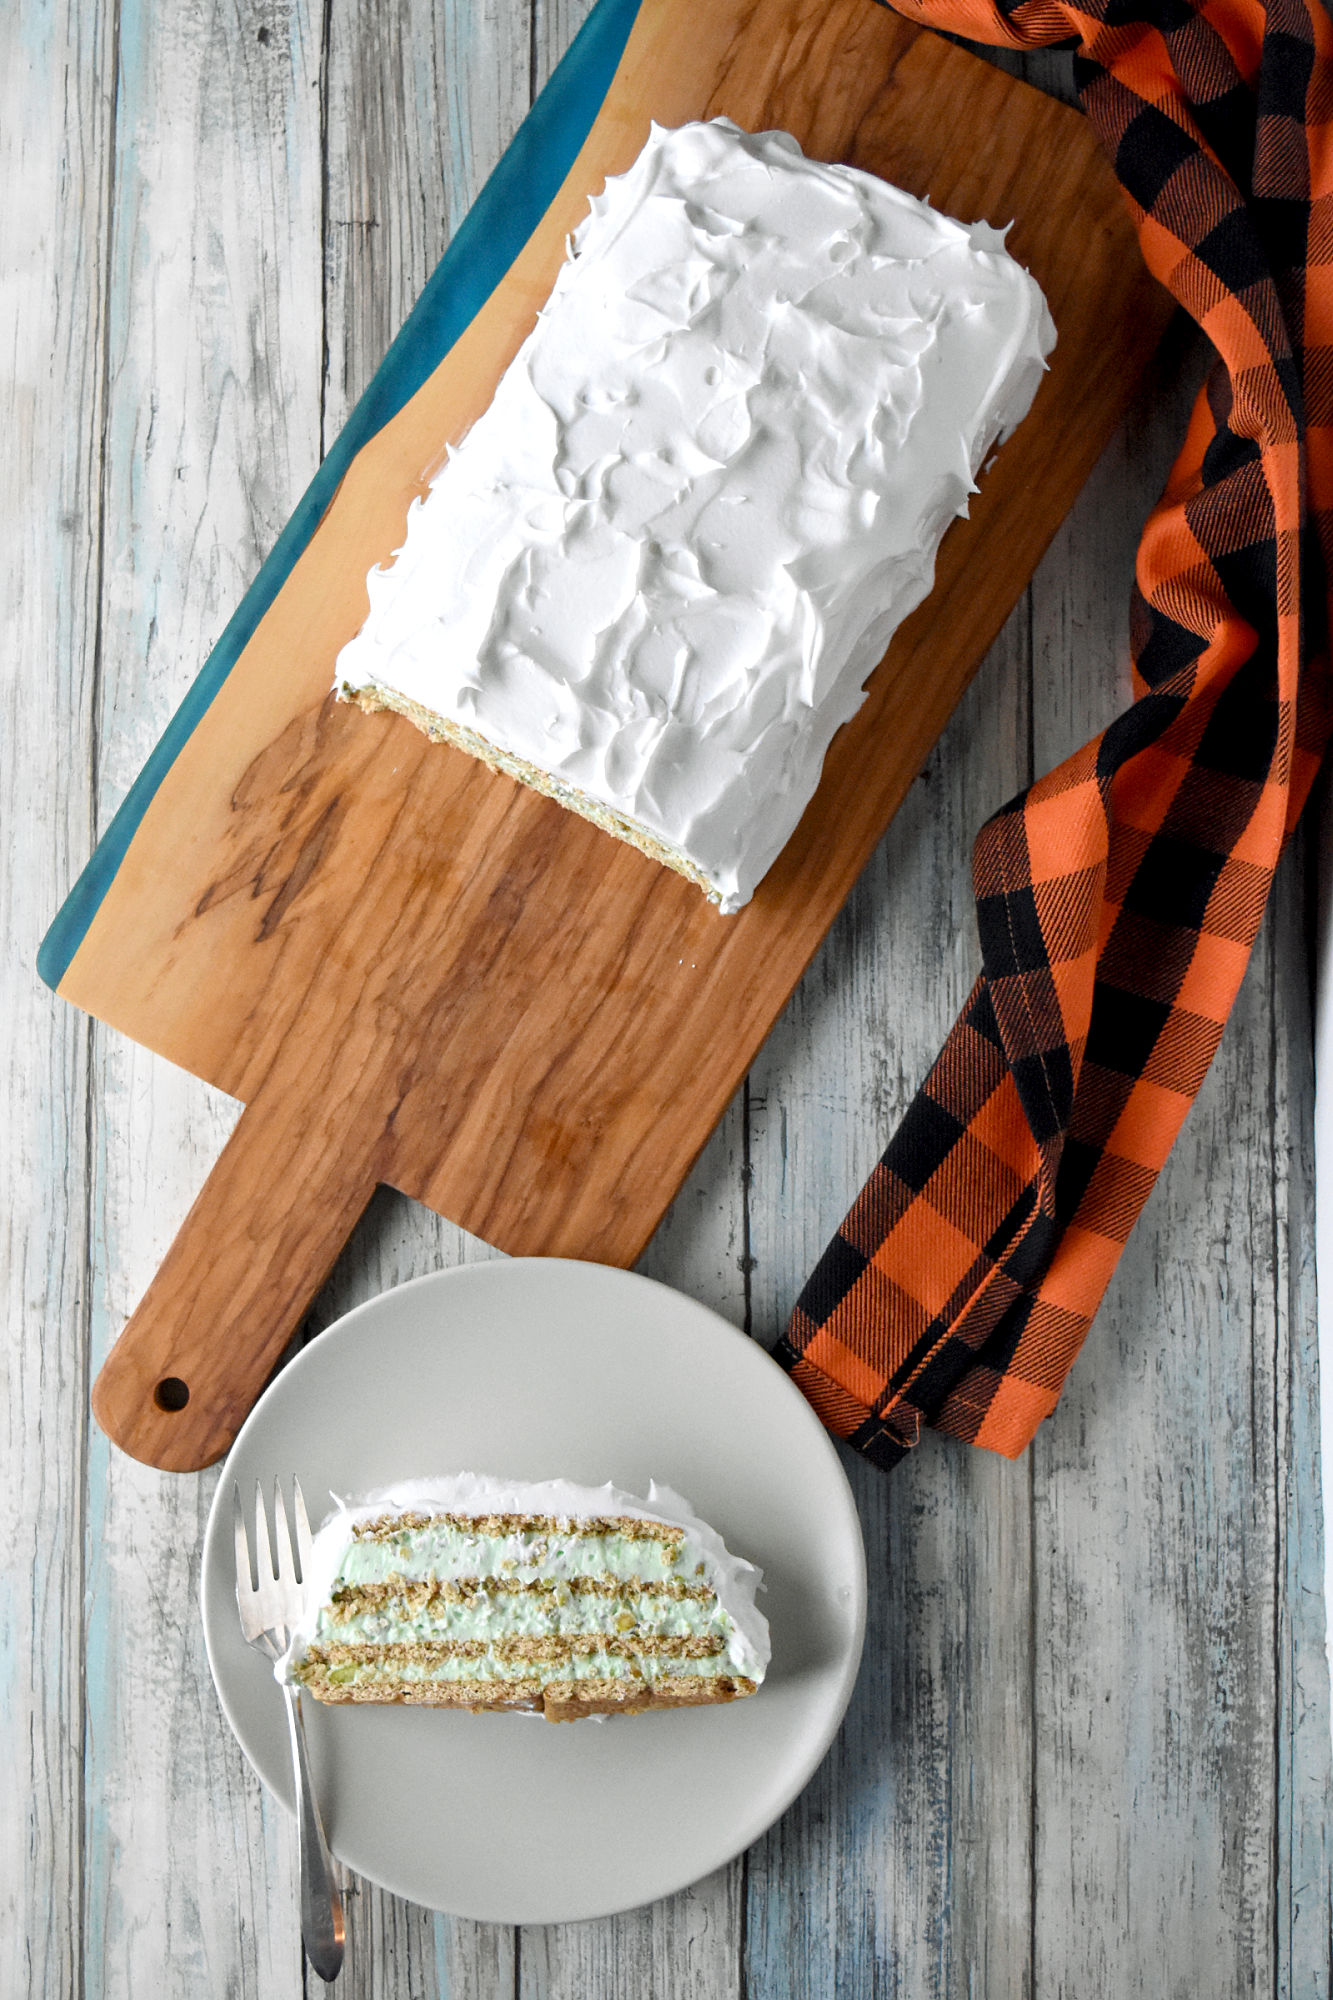 Wicked Witch Icebox Cake is as green as the wicked witch, but tastes deliciously sweet and is full of pistachio flavor. It’s a quick and easy dessert to whip up for your Halloween parties. #HalloweenTreatsWeek #iceboxcake #WickedWitch #pistachio